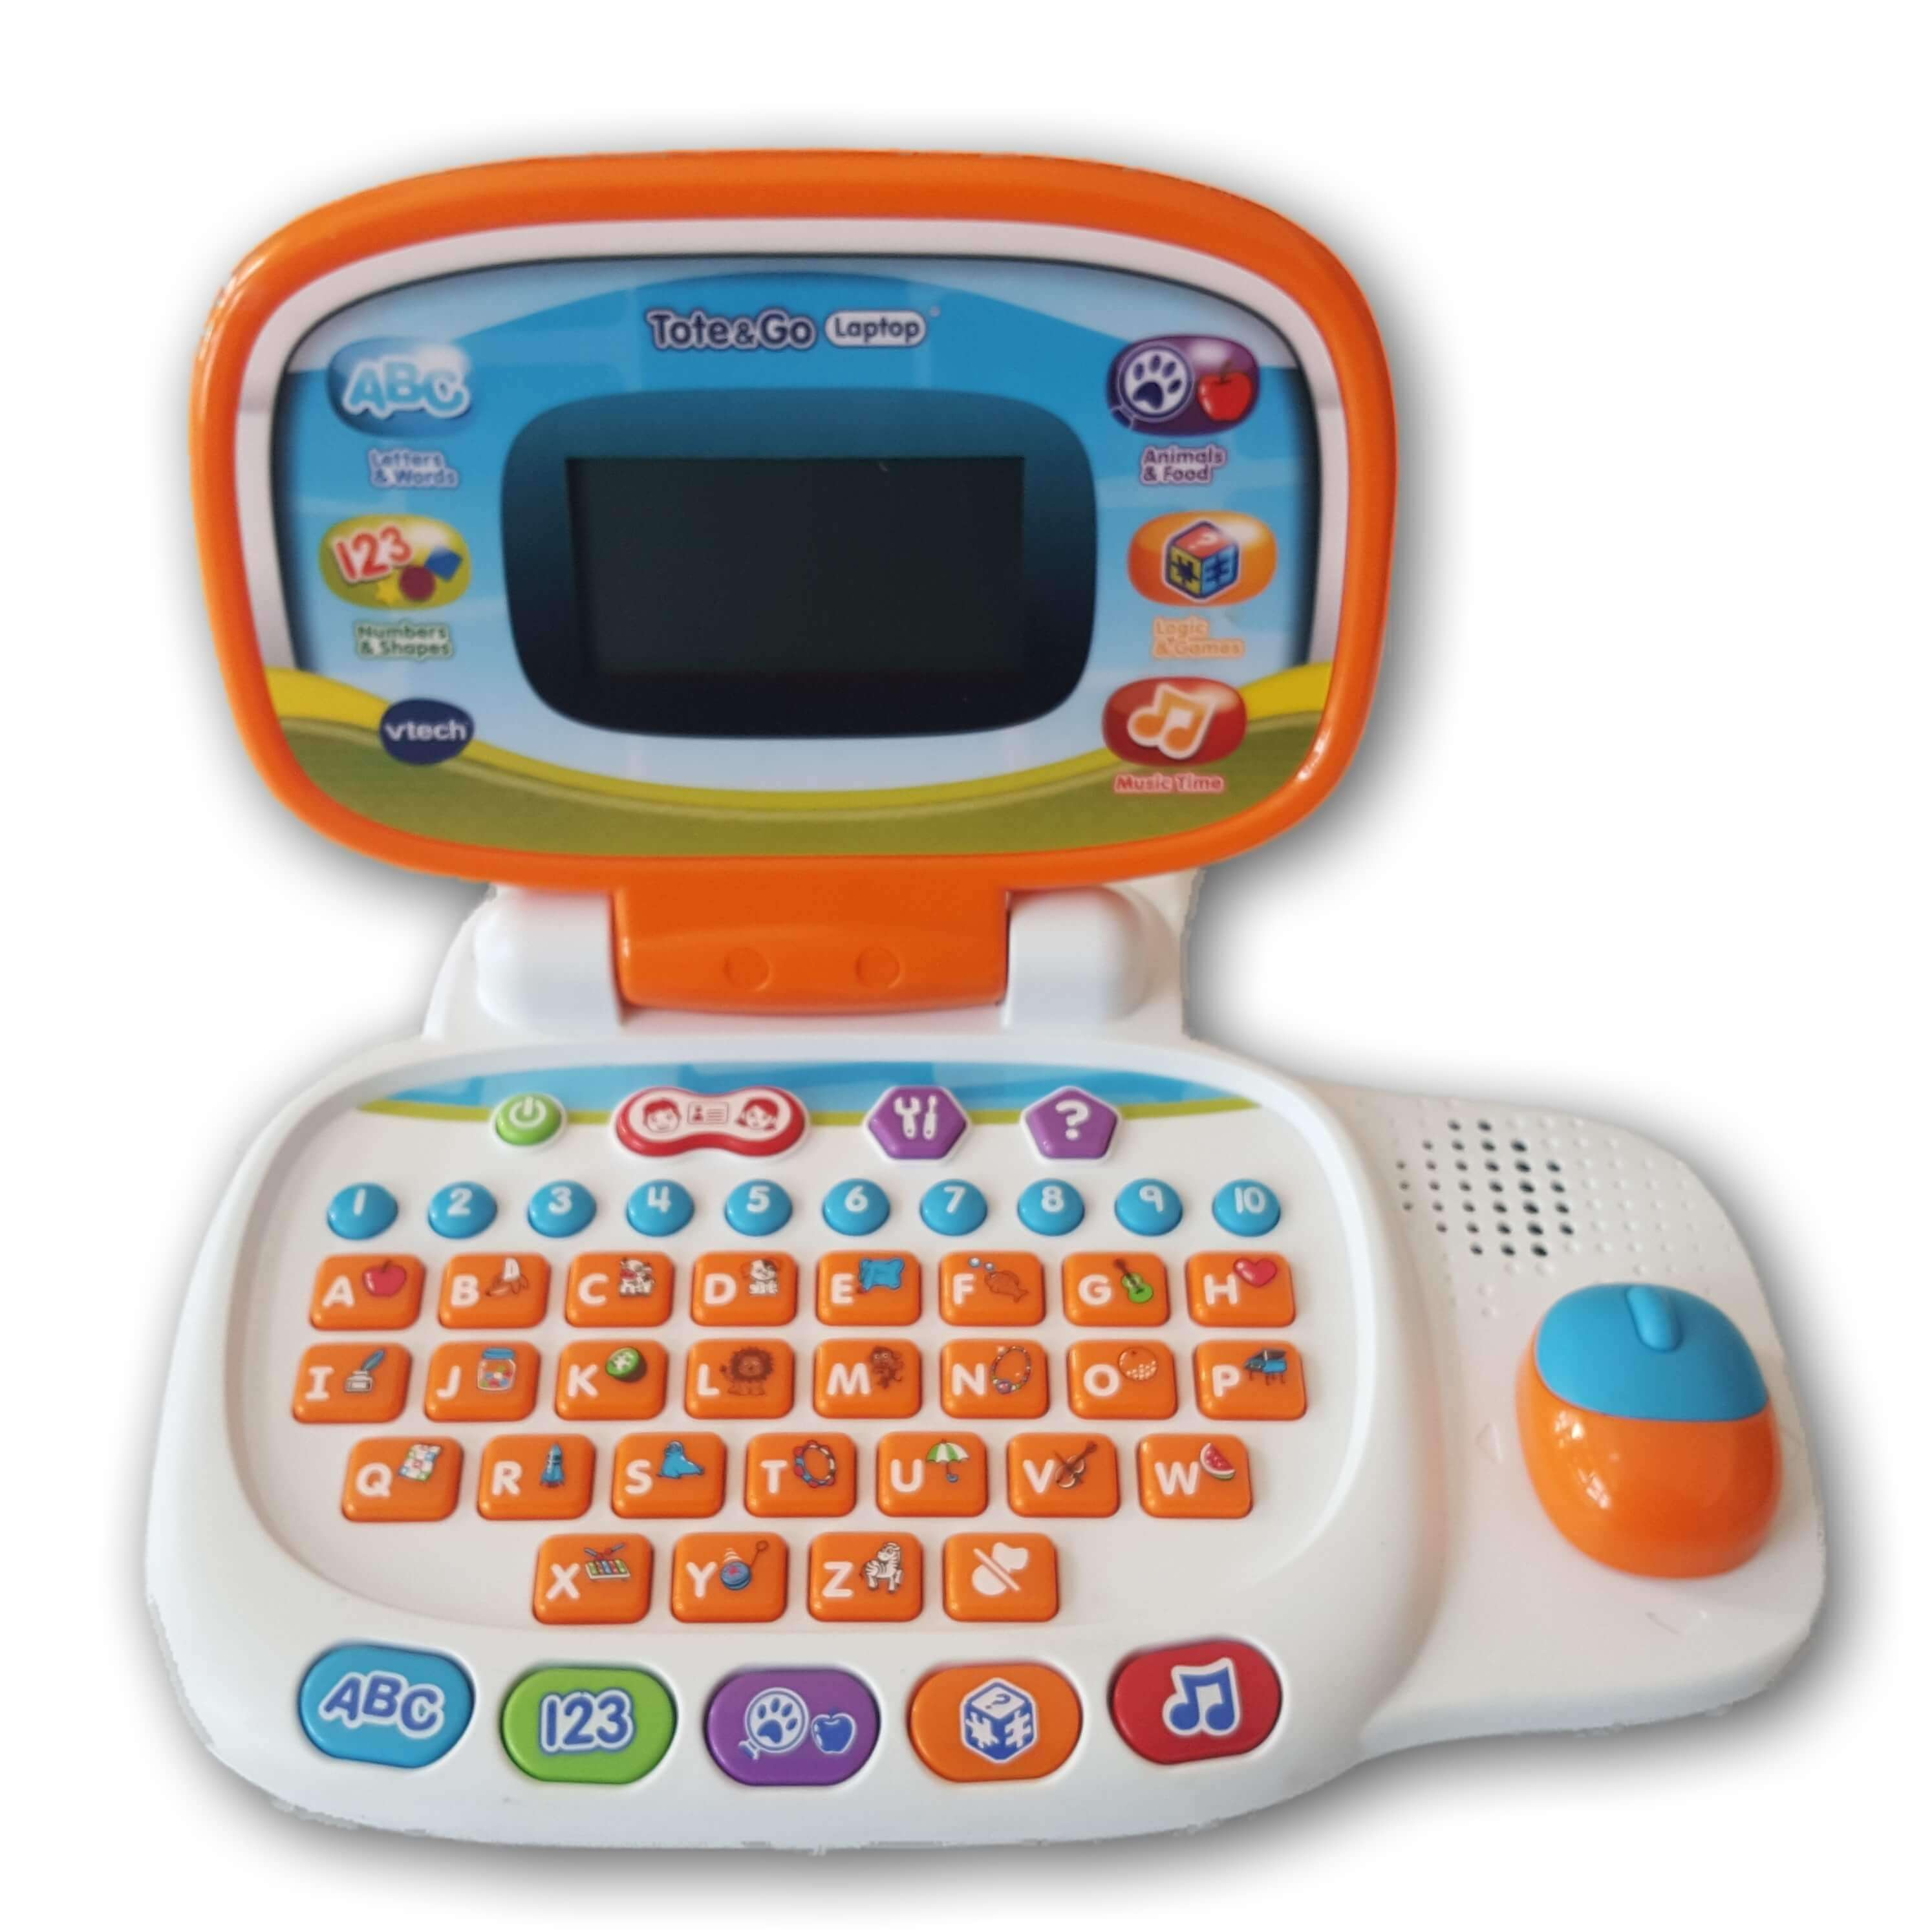 VTECH ~ TOTE & GO LAPTOP ~ EDUCATIONAL ELECTRONIC KIDS COMPUTER TOY ORANGE  - NEW